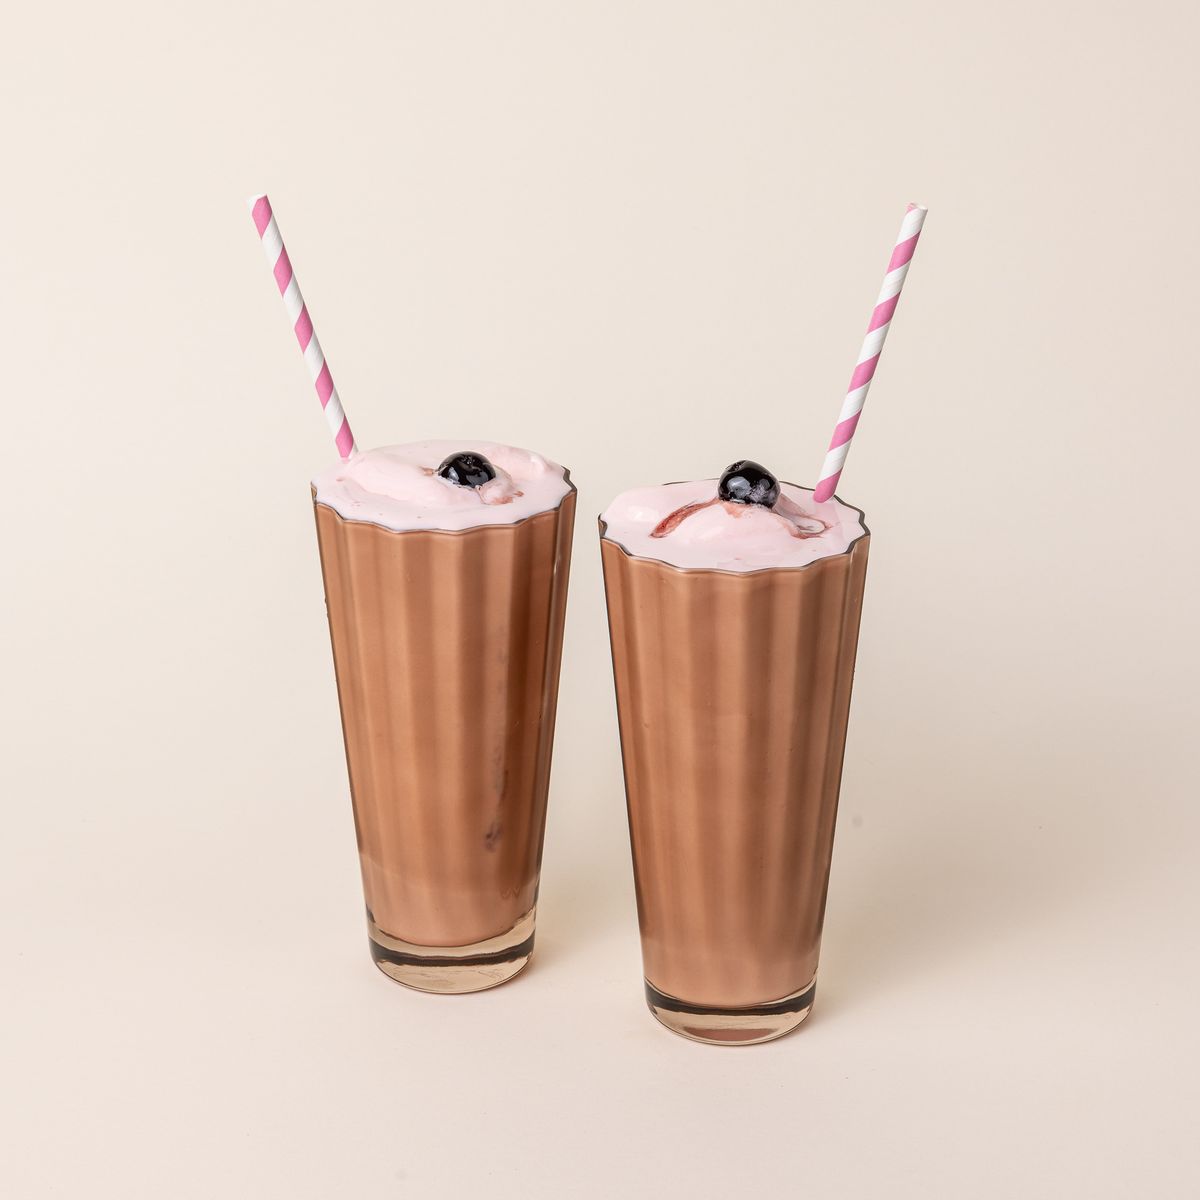 Two tall transparent light amber glasses with wide grooves on the side. The glasses are filled with a milkshake, cherry, and a striped pink and white straw